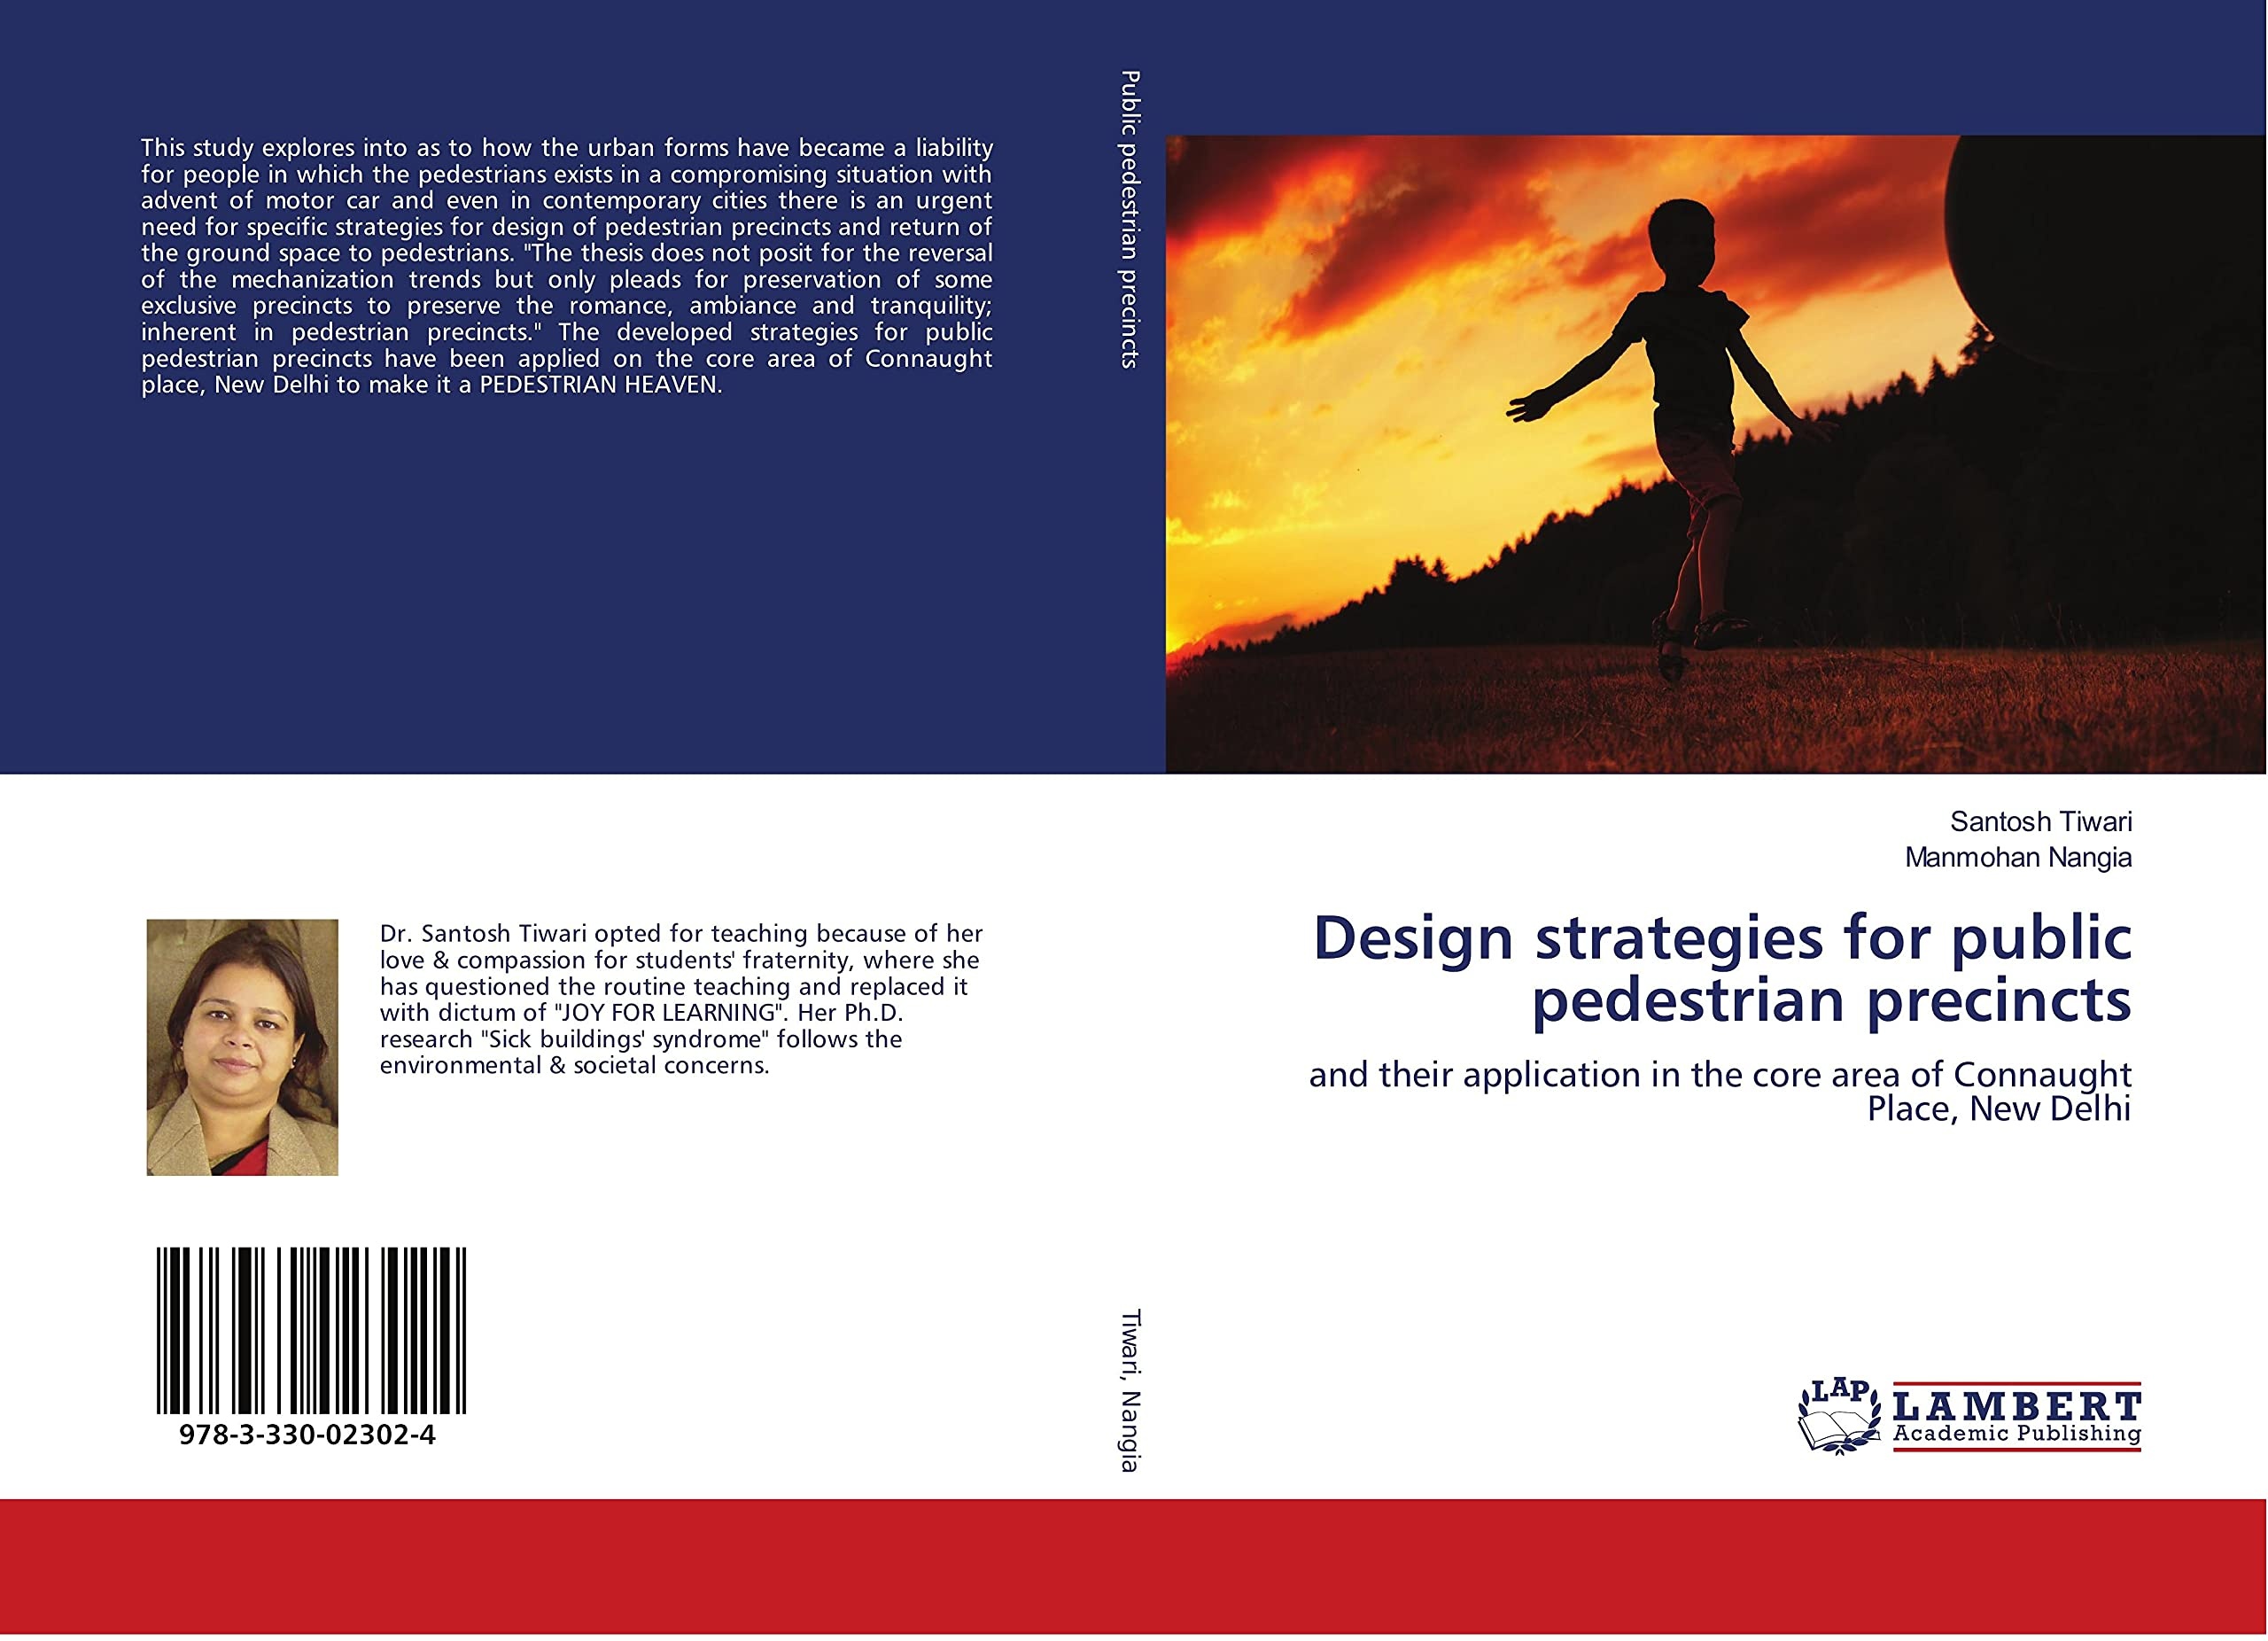 Design Strategies for Public Pedestrian precincts: and Their Application in The core Area of Connaught Place, New Delhi